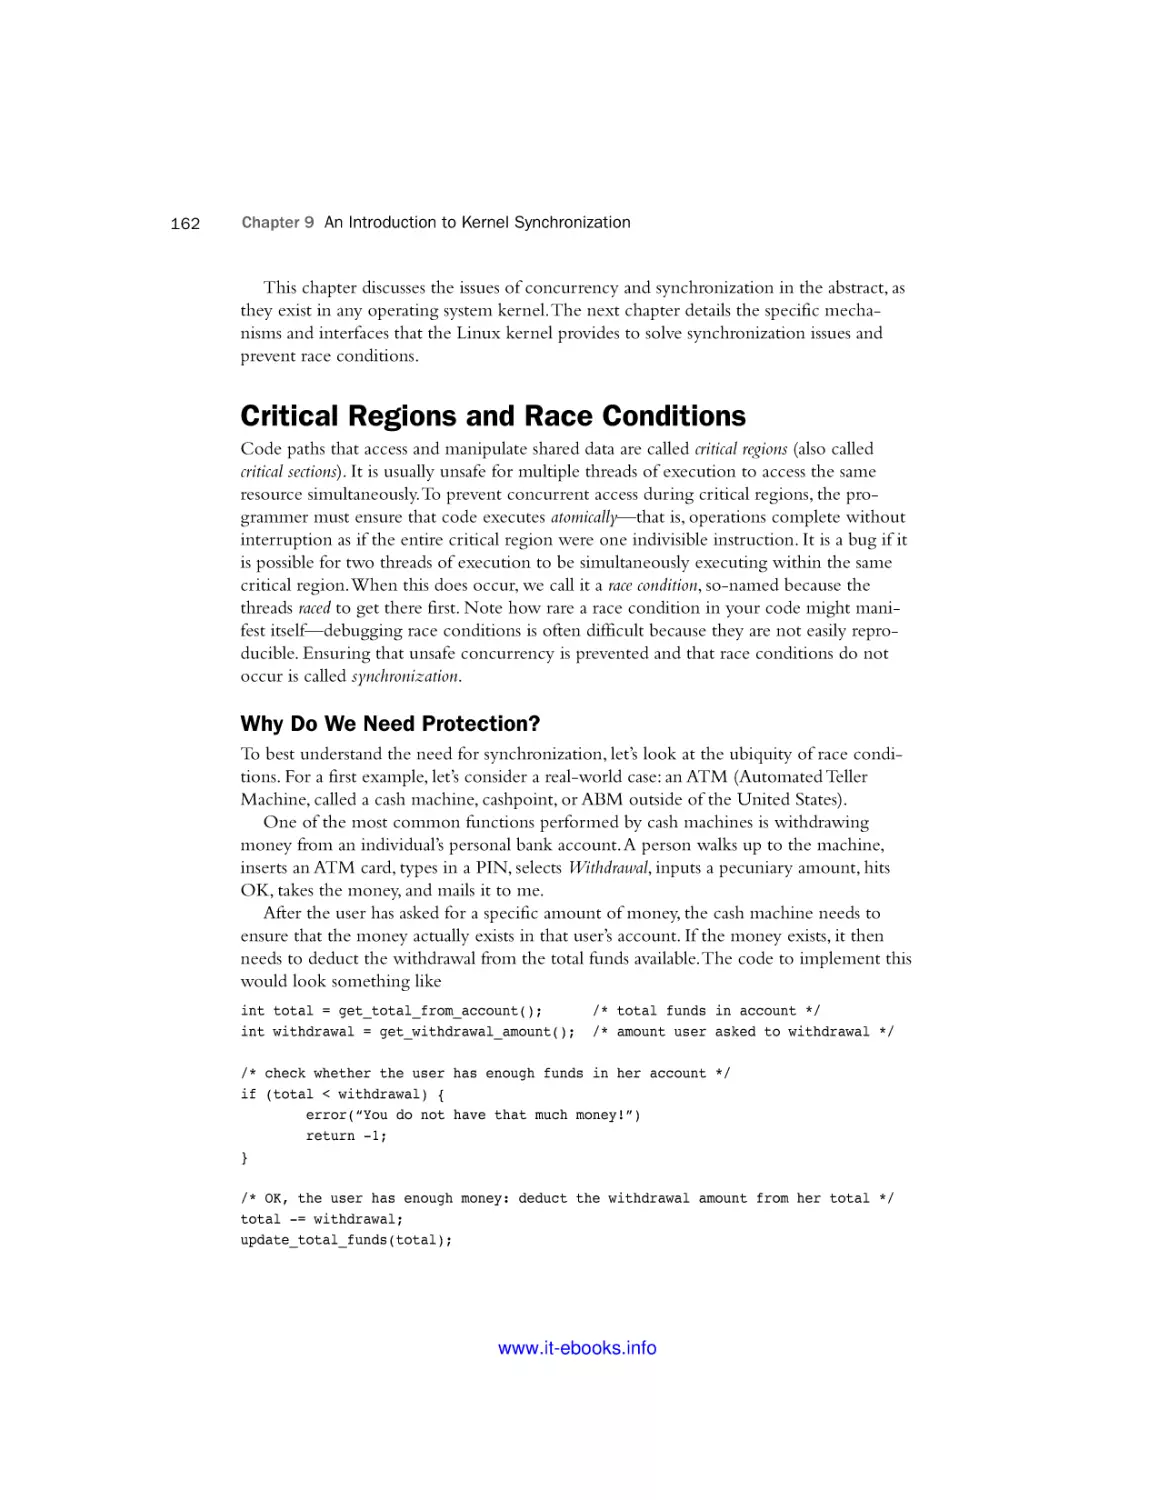 Critical Regions and Race Conditions
Why Do We Need Protection?